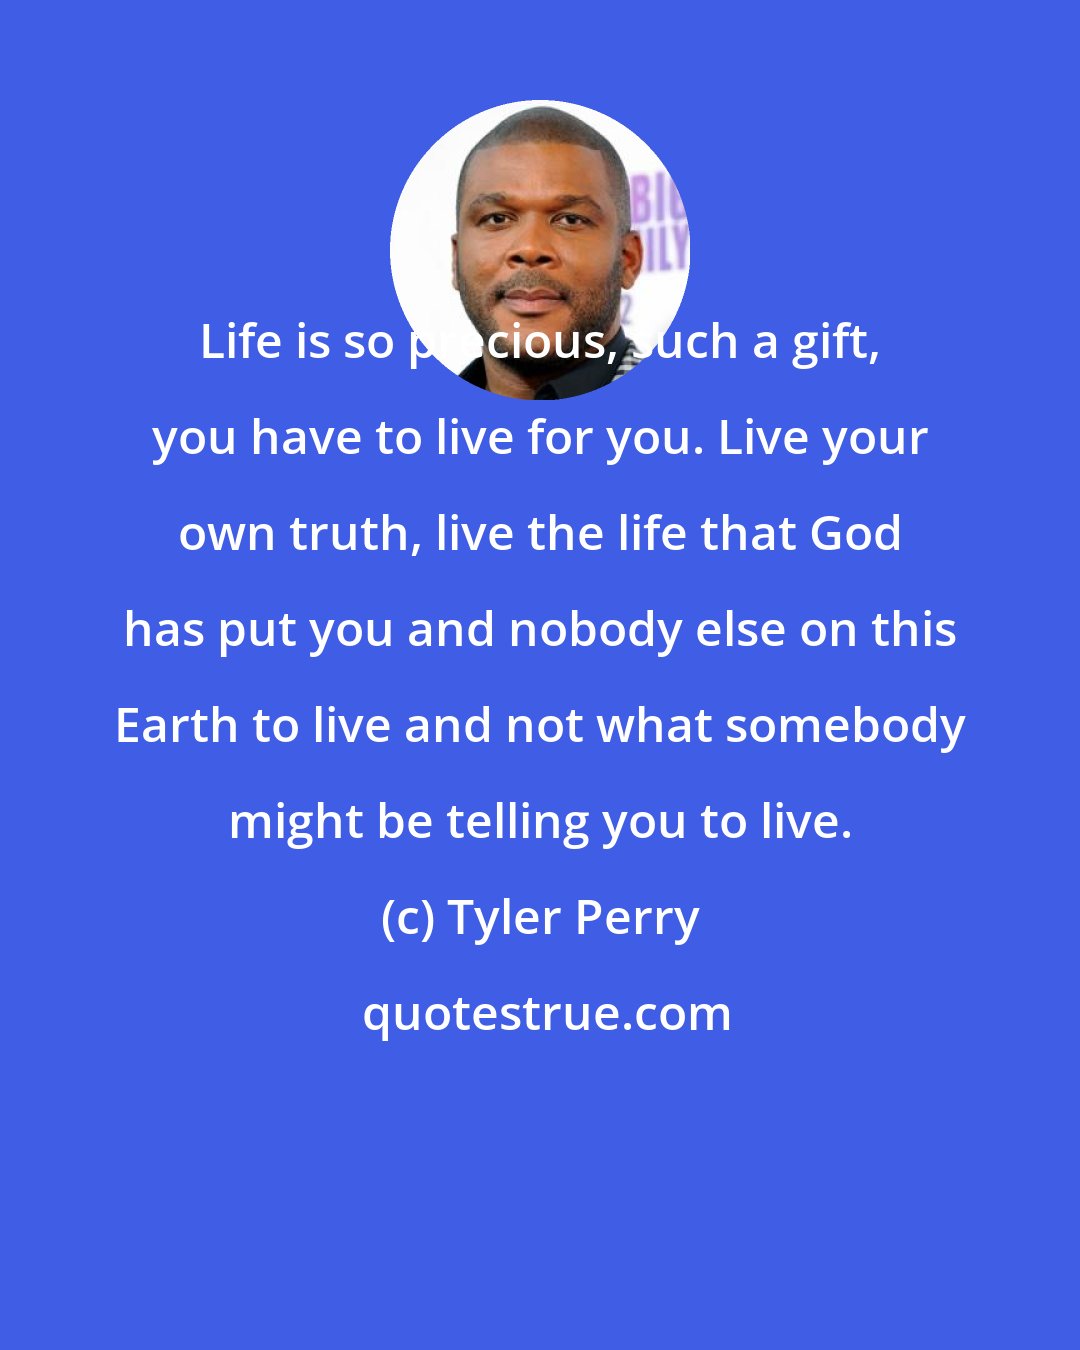 Tyler Perry: Life is so precious, such a gift, you have to live for you. Live your own truth, live the life that God has put you and nobody else on this Earth to live and not what somebody might be telling you to live.